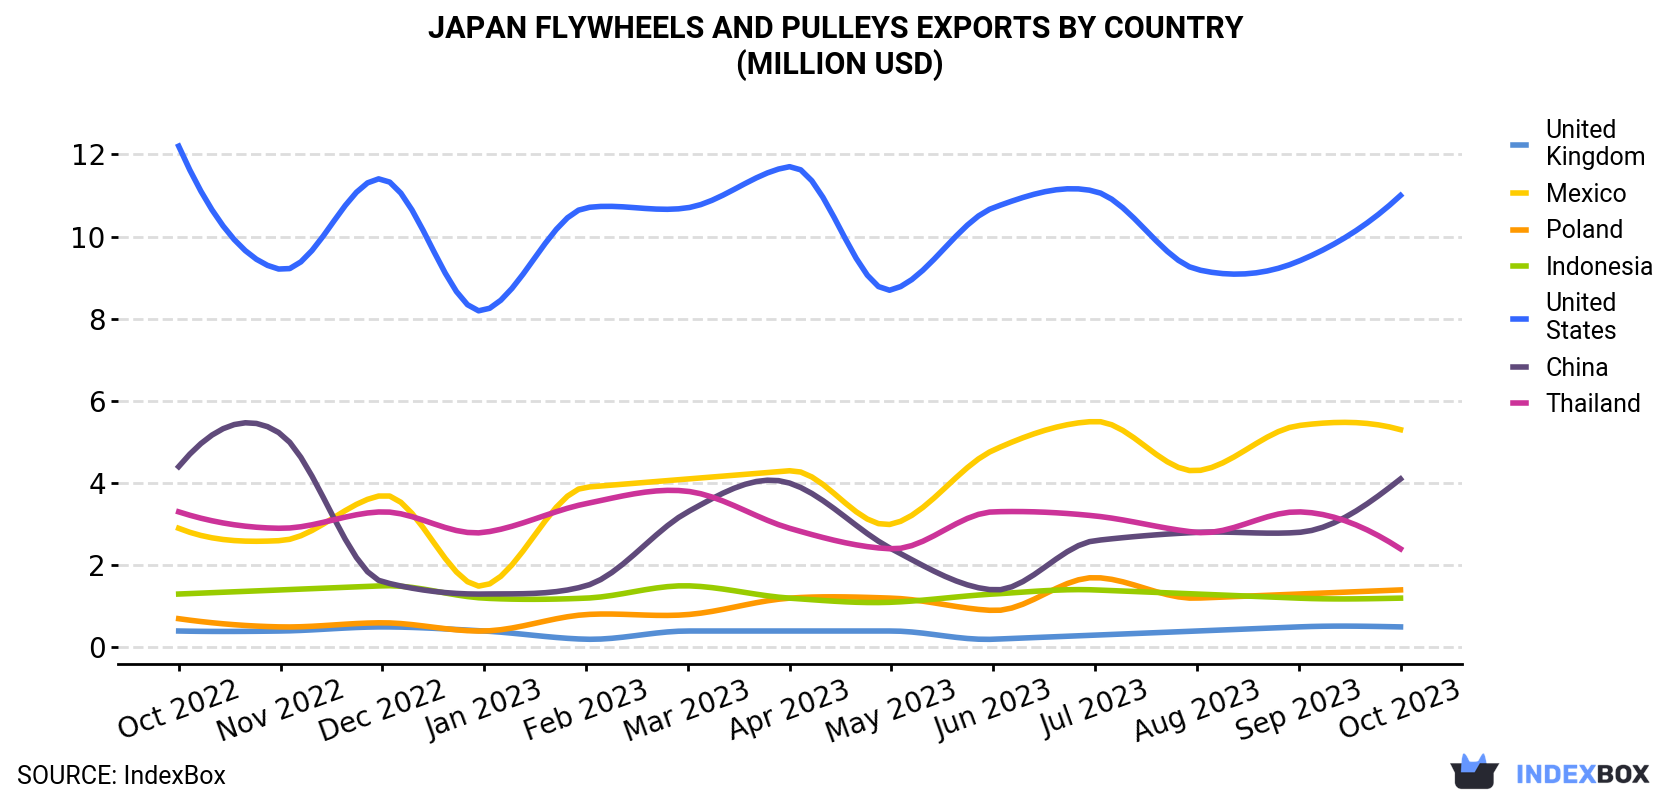 Japan Flywheels And Pulleys Exports By Country (Million USD)